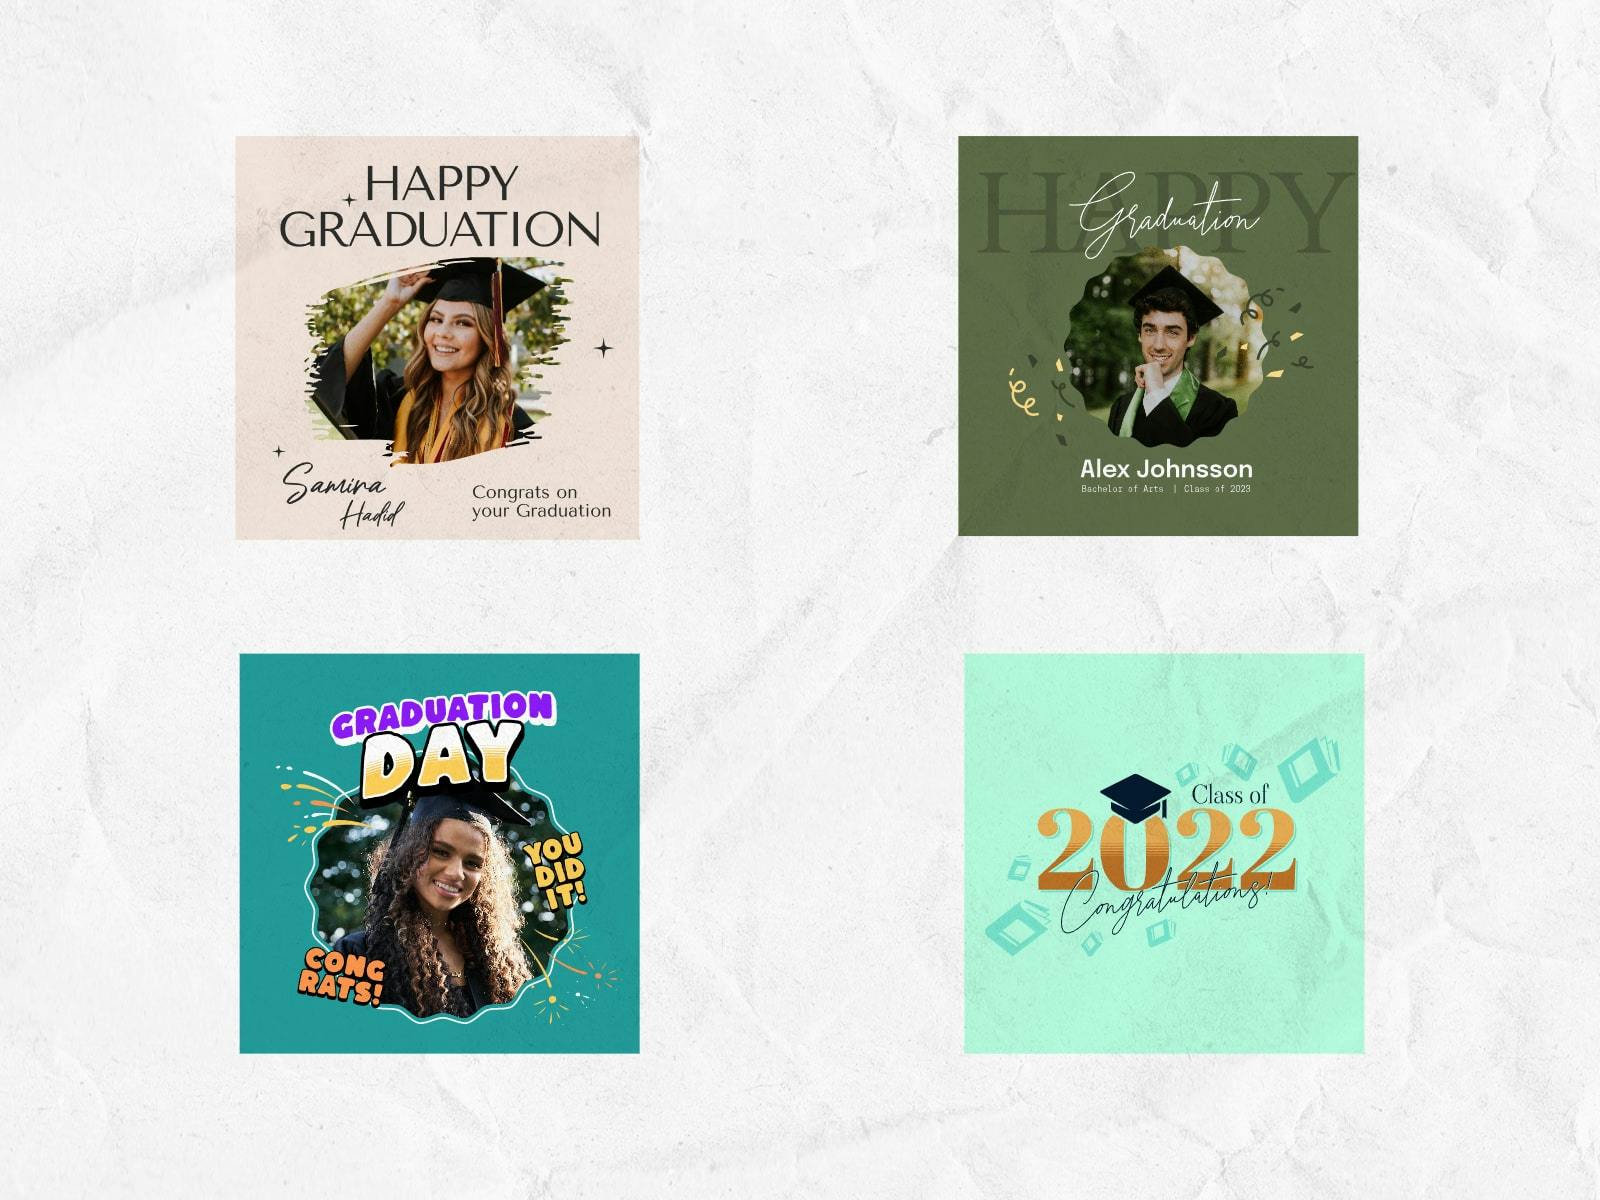 Graduation Announcement Card: Collection of graduation announcement cards